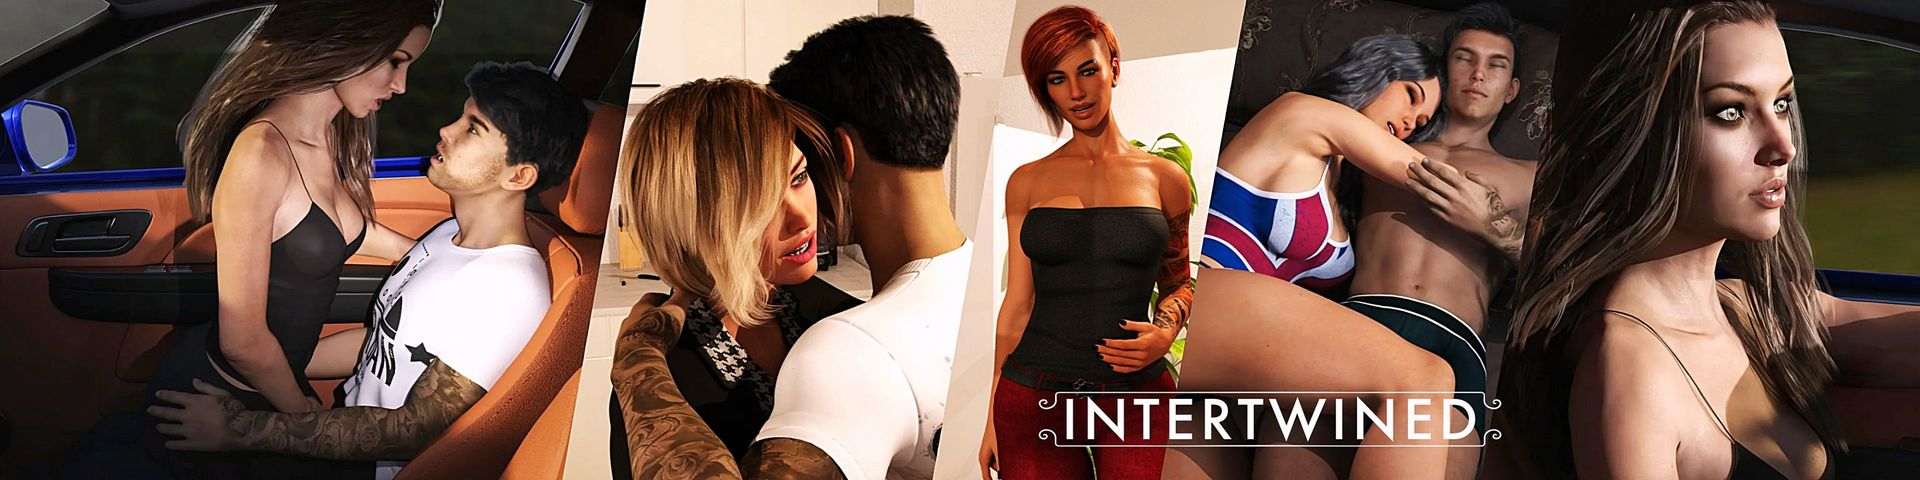 Intertwined Nyx Adult xxx Game Download